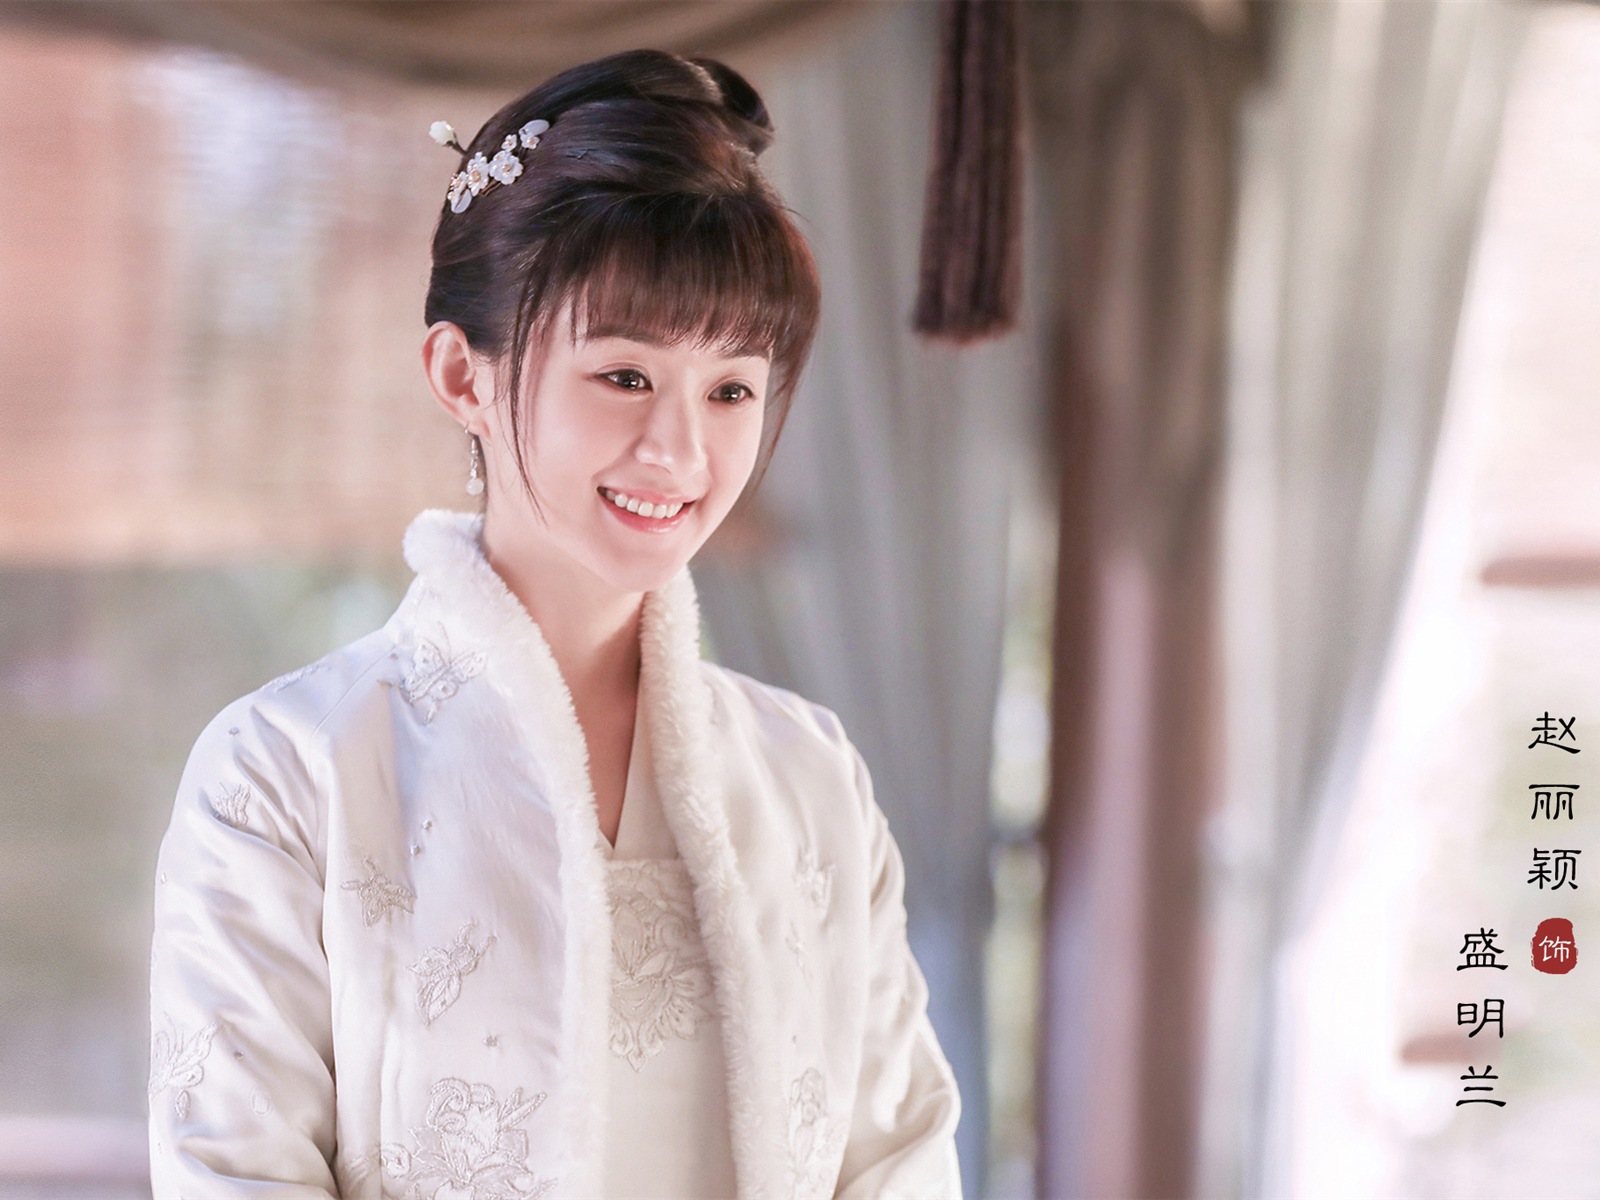 The Story Of MingLan, TV series HD wallpapers #28 - 1600x1200